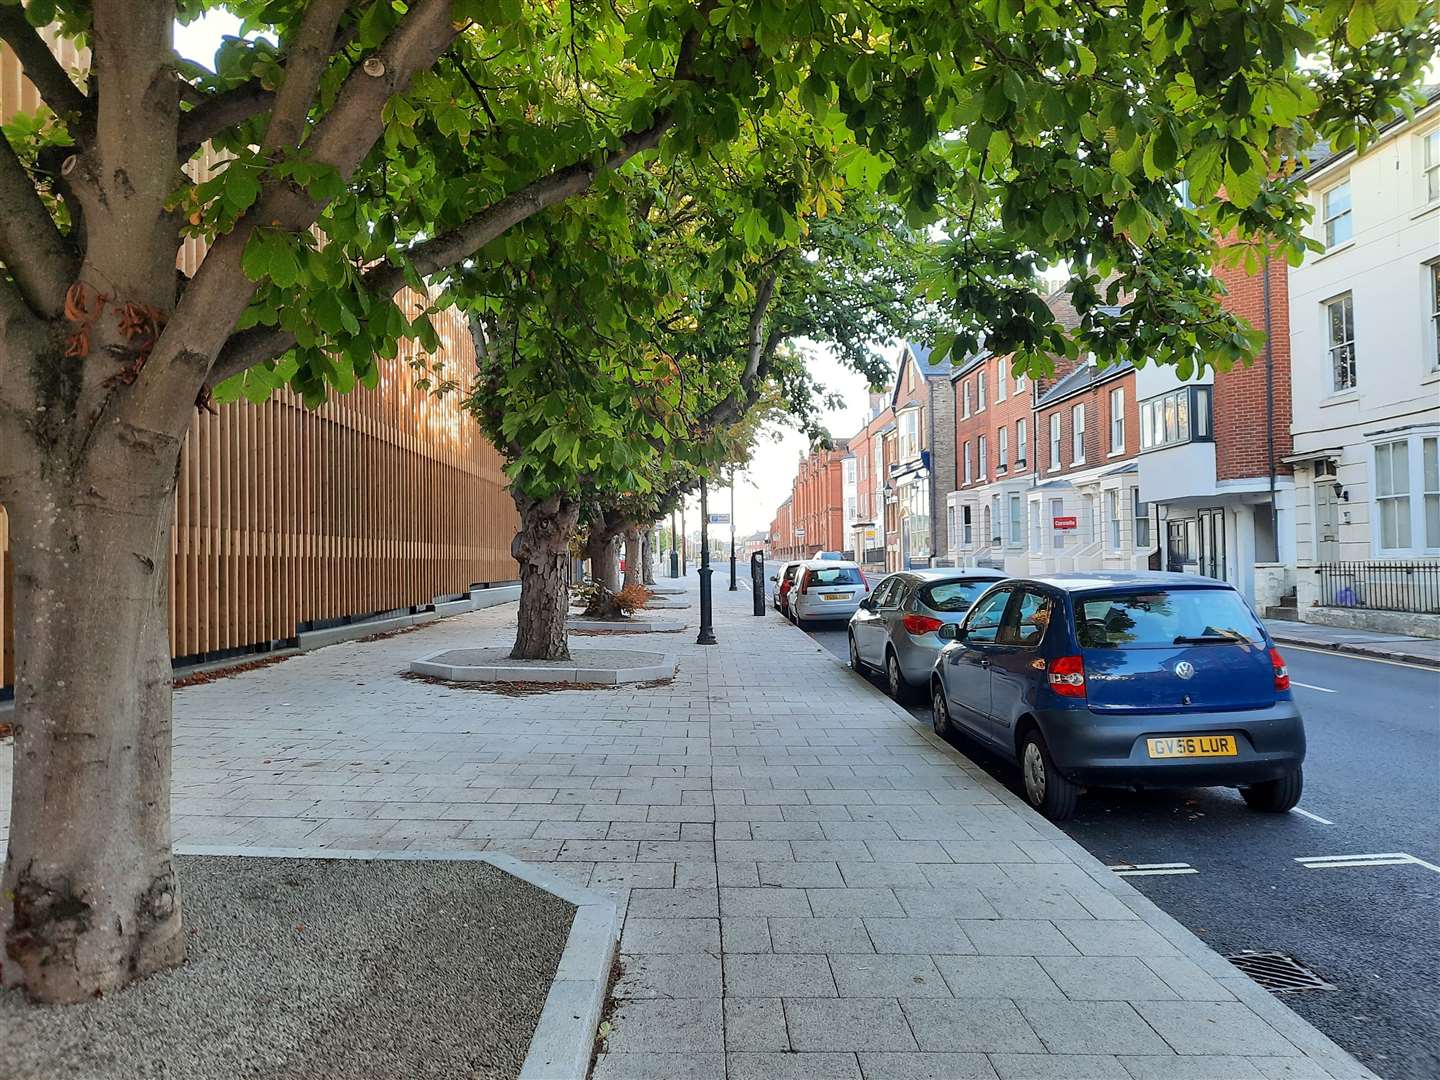 Street traders are proposed to set up stalls between the trees and back onto the multi-storey car park